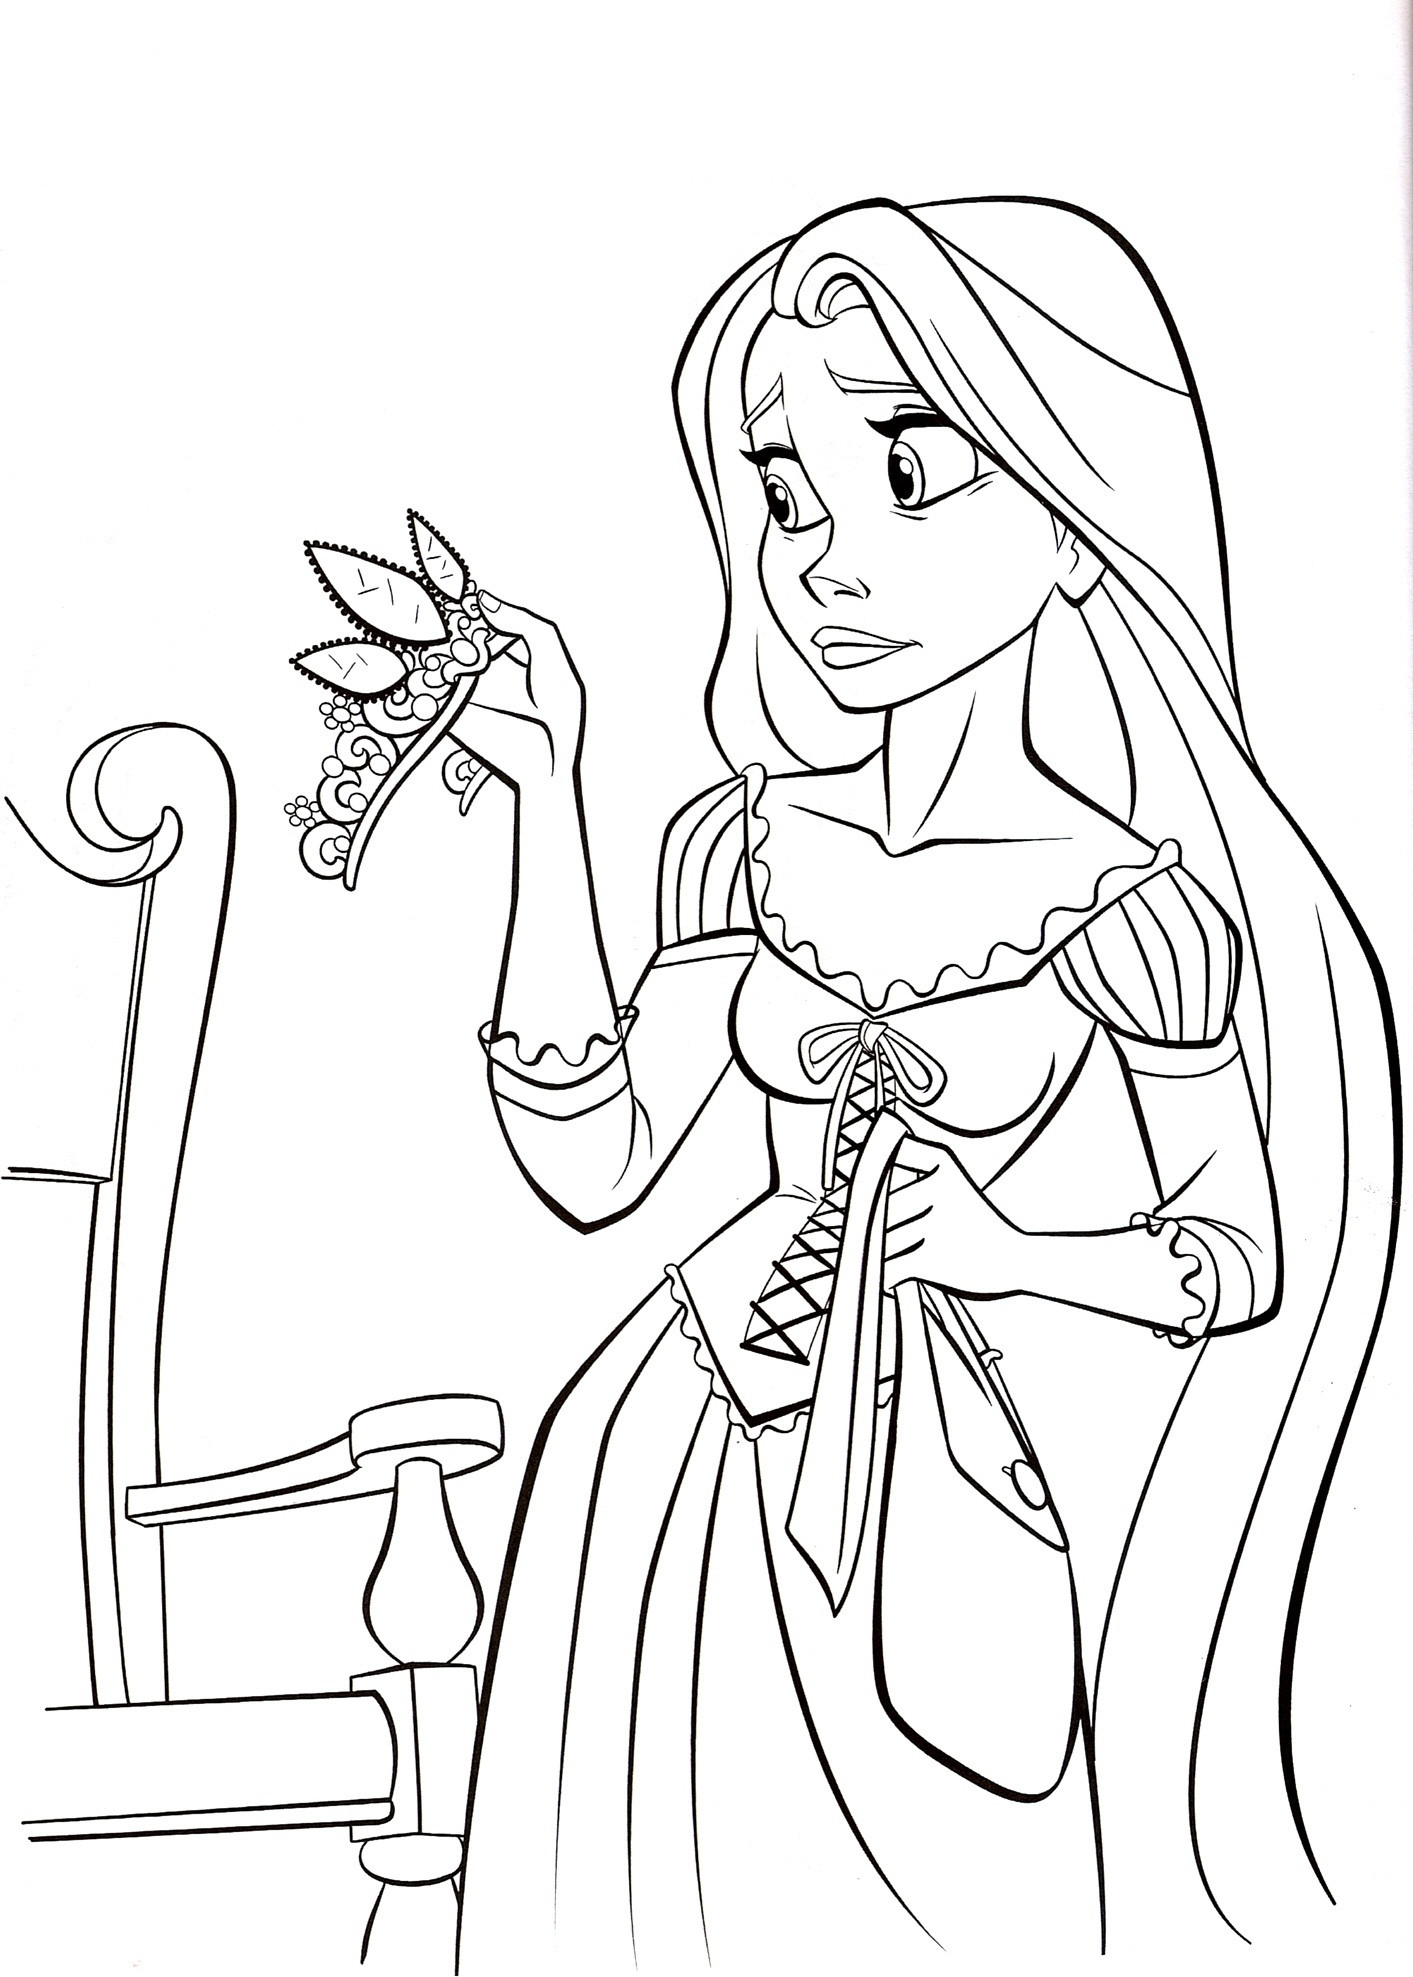 Free Coloring Pages For Girls Disney
 Free Printable Tangled Coloring Pages For Kids